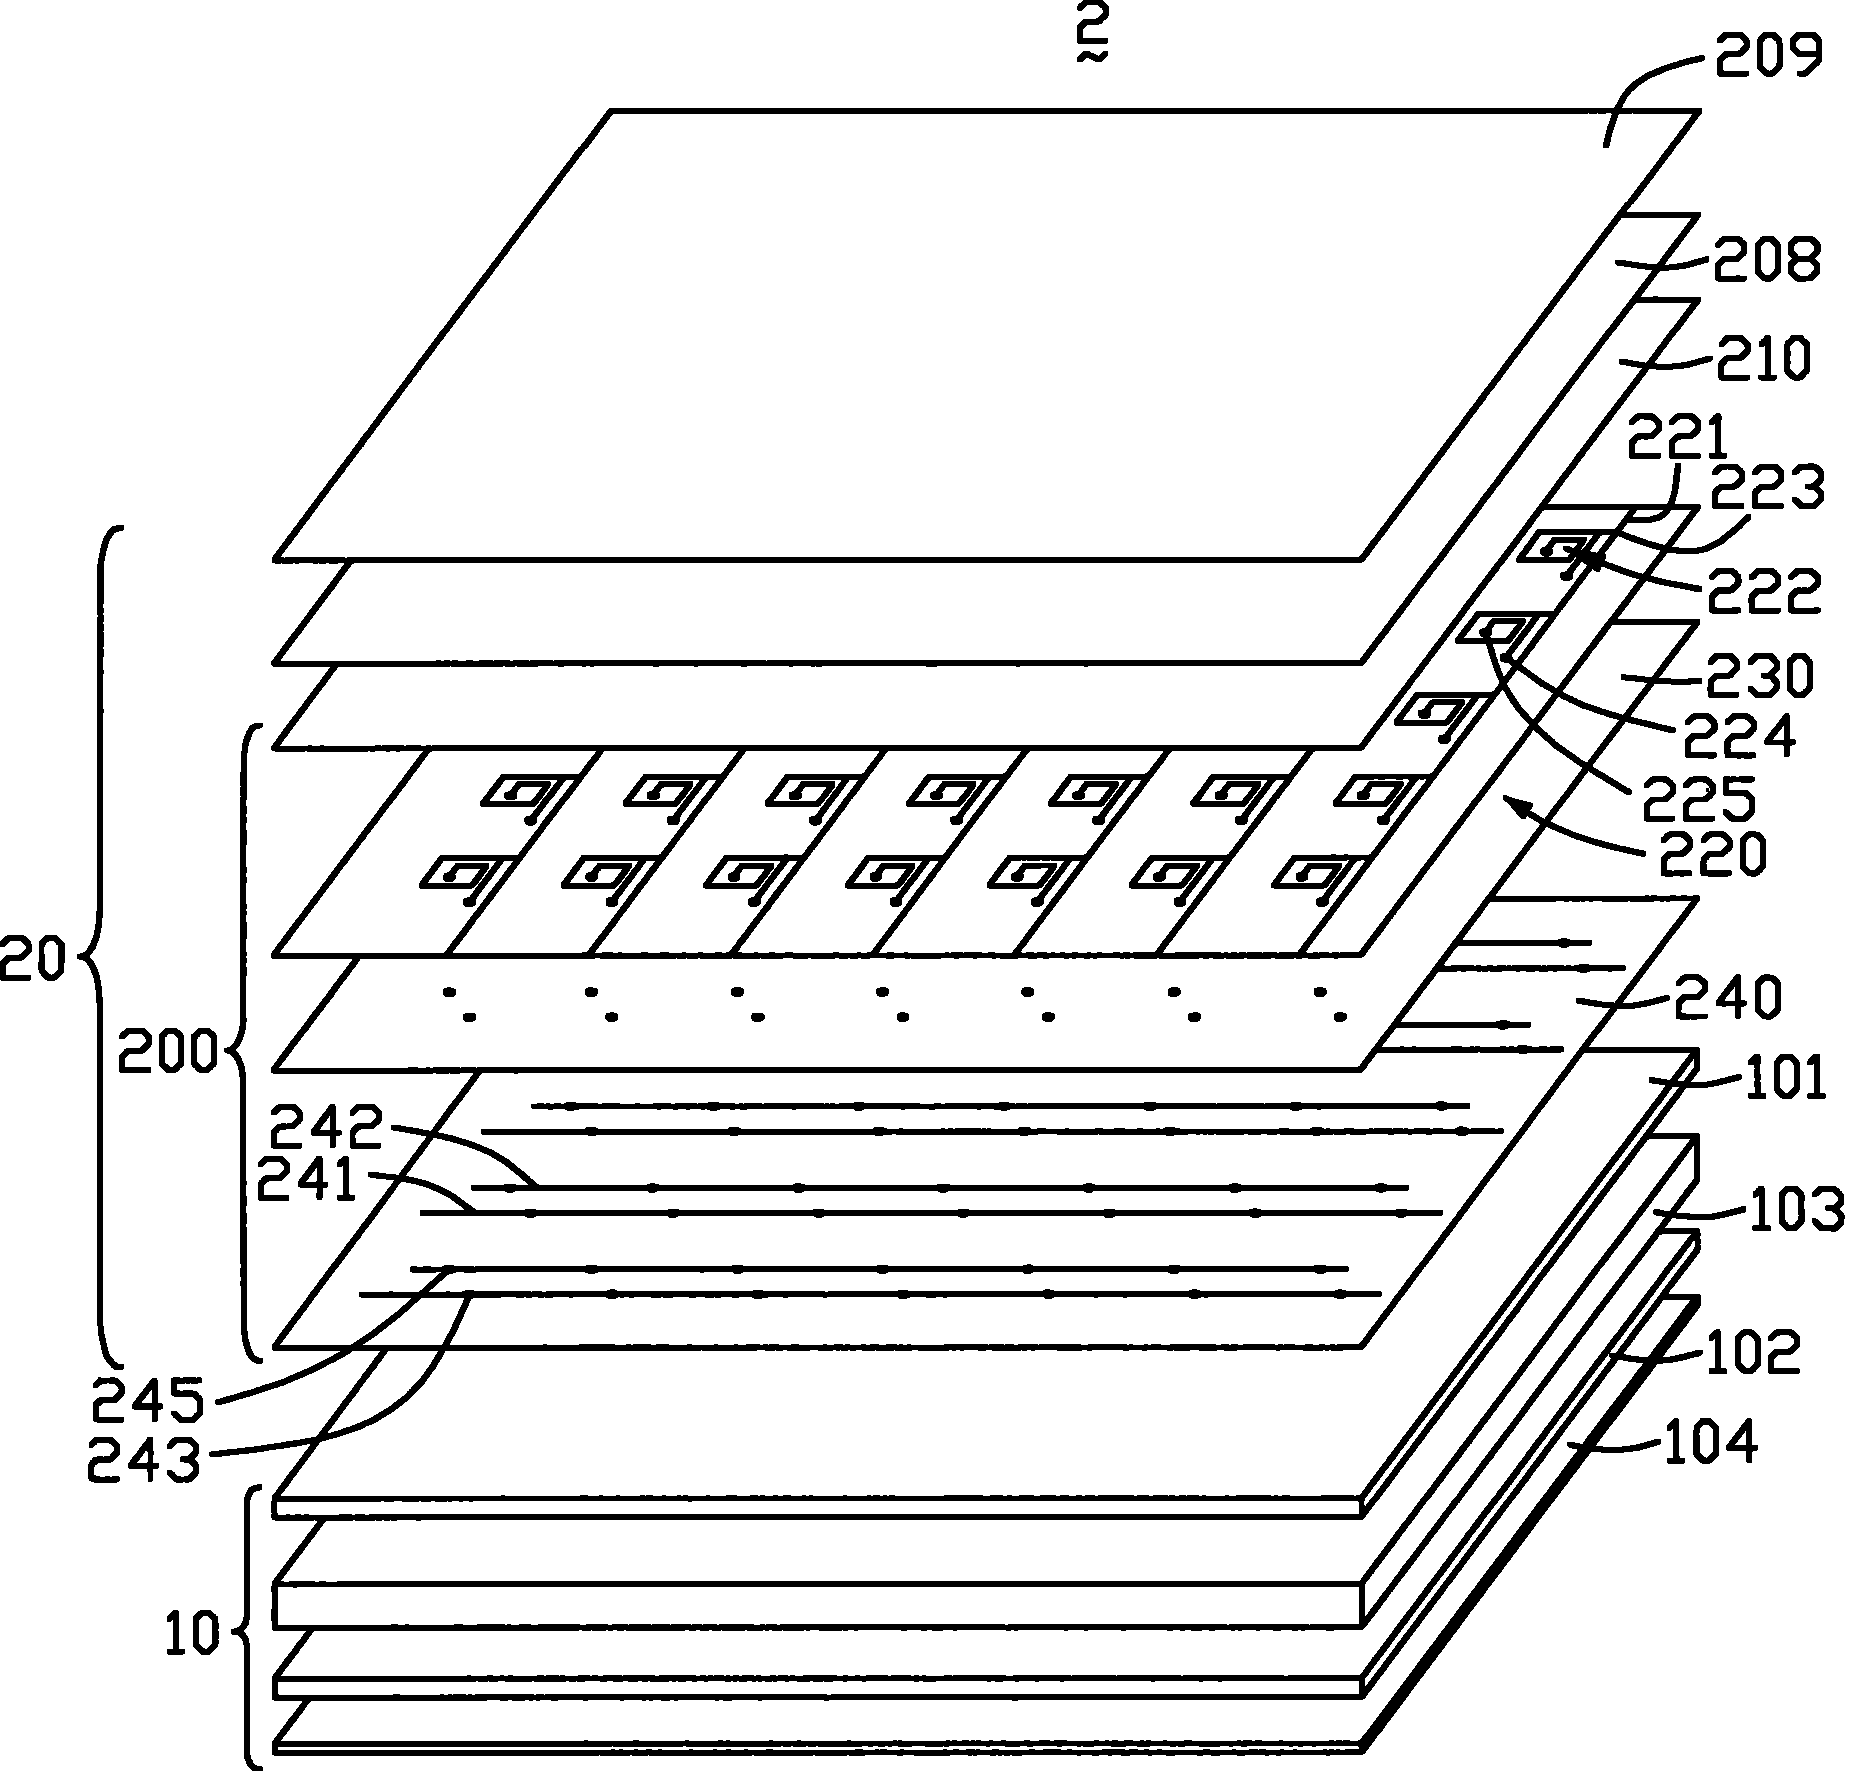 Touch-control liquid crystal display device